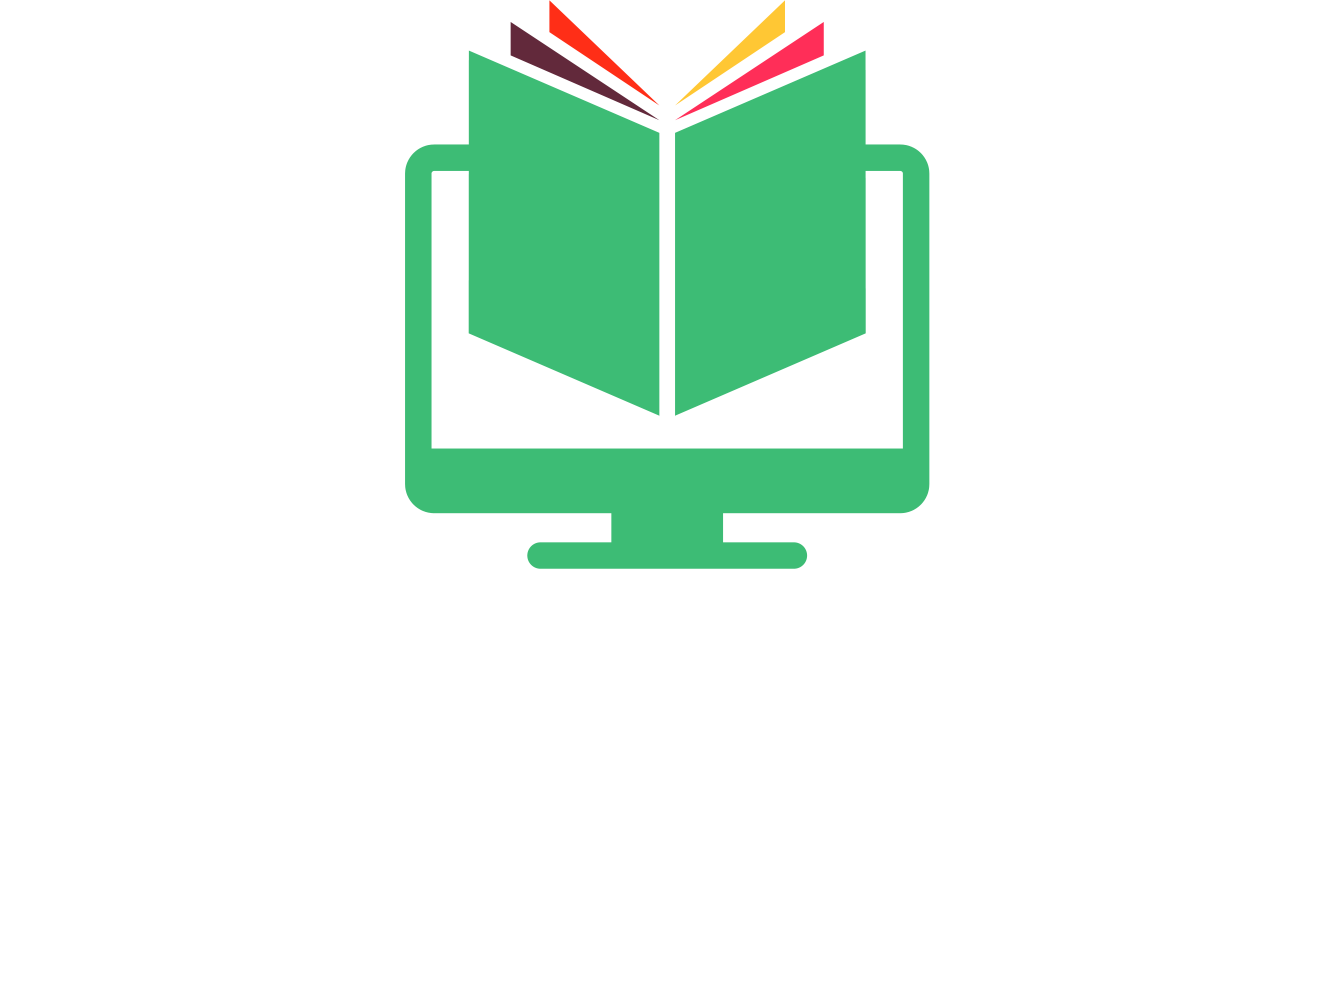 AfroCentric Online Academy